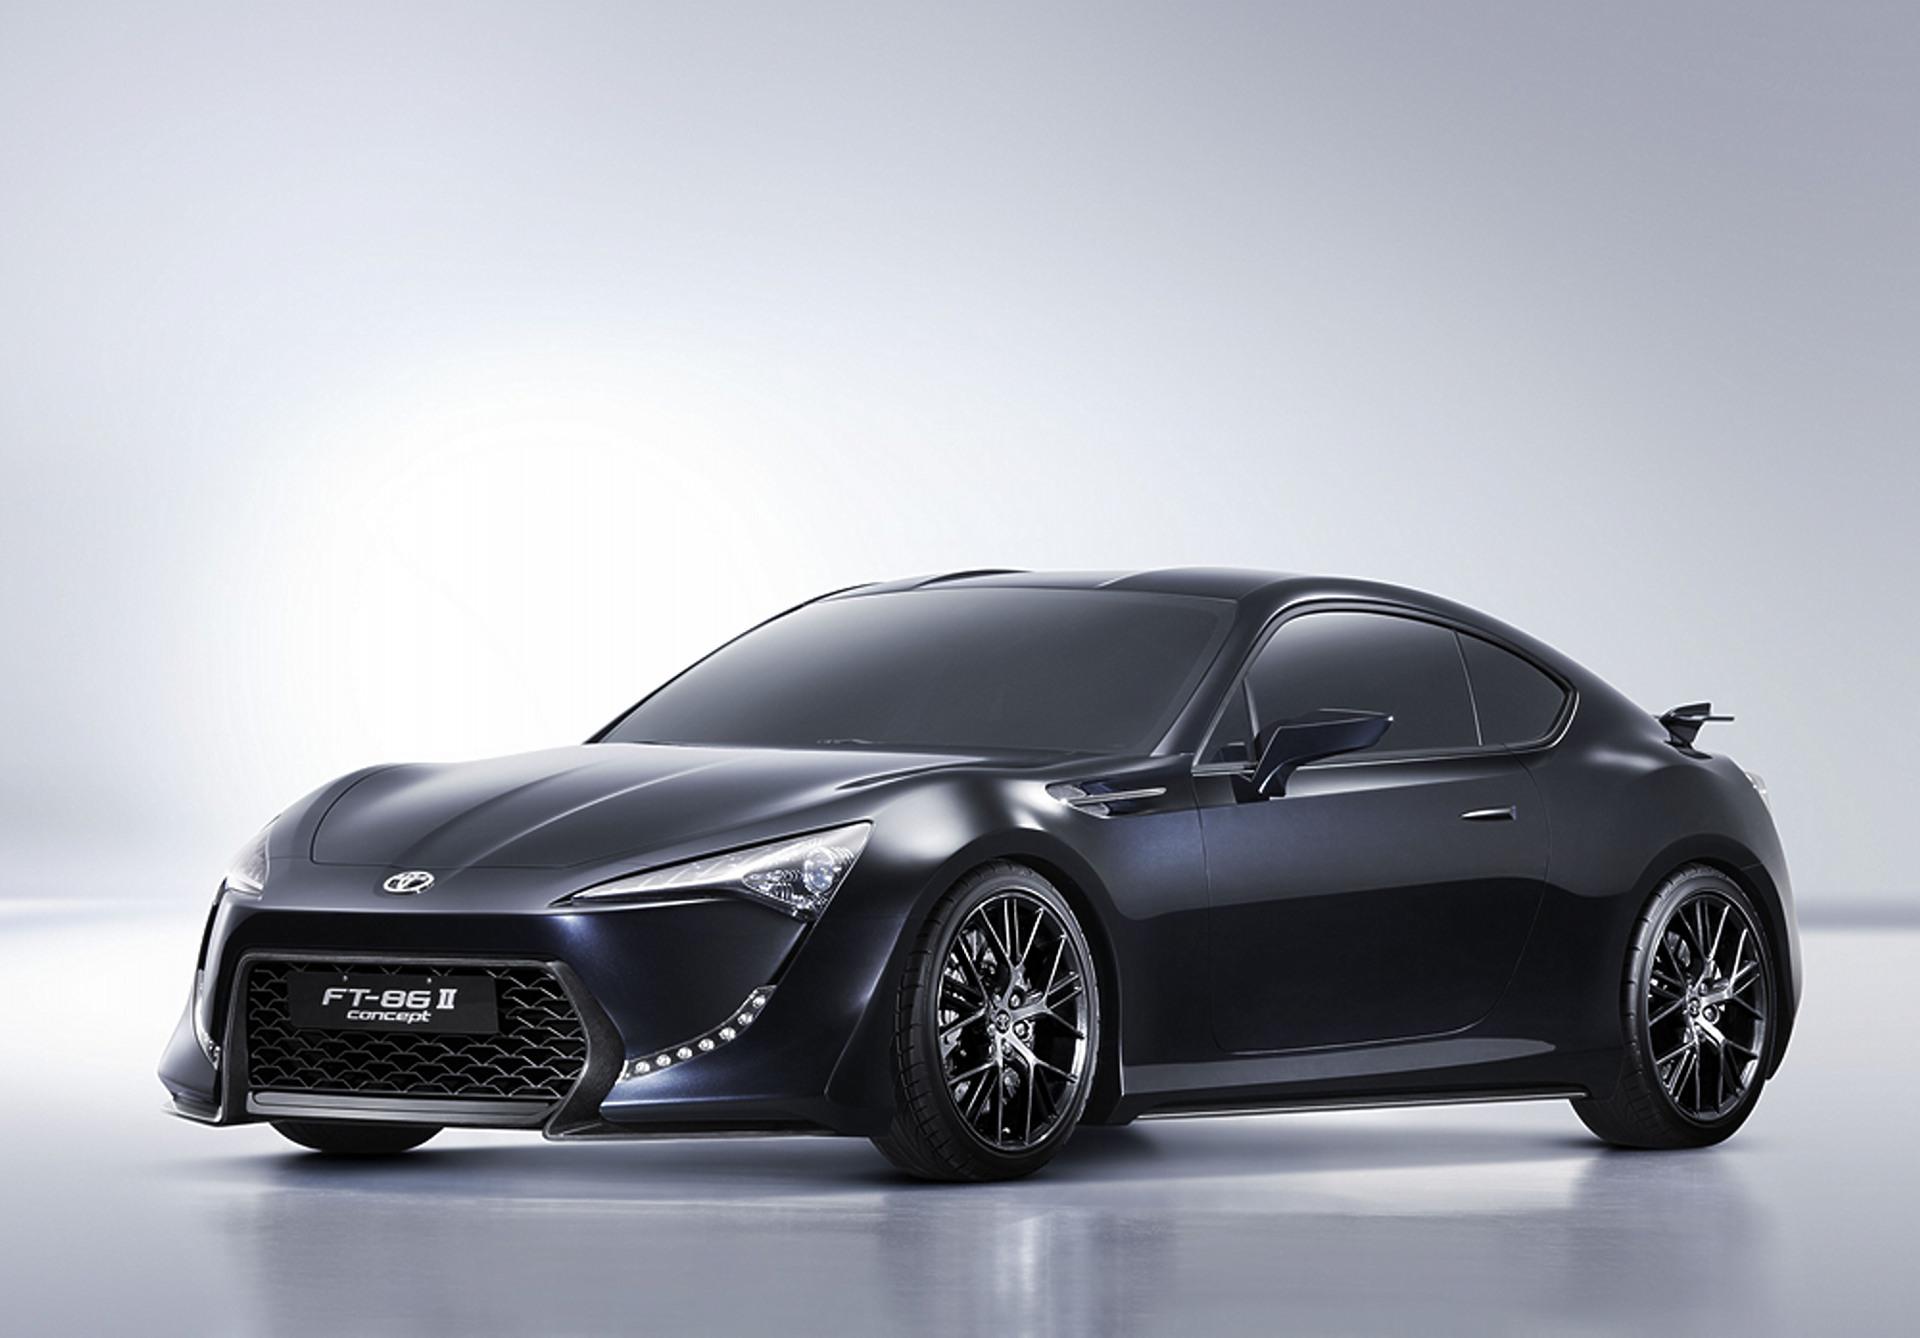 2011 Toyota Ft86 Ii Concept News And Information Research And Pricing